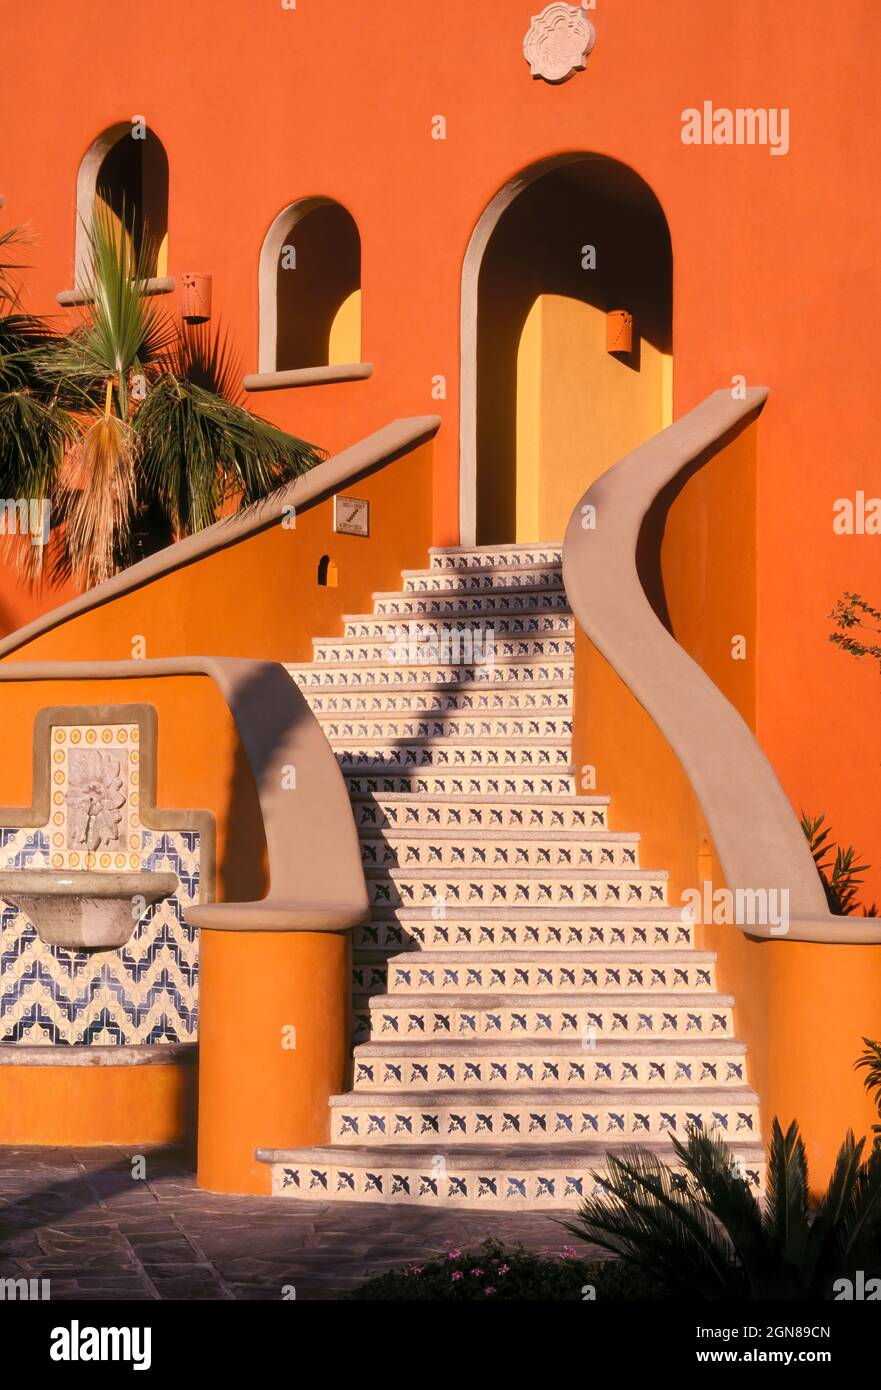 Tiled stairs at entance to guest room at Hacienda del Mar hotel, Cabo San Lucas, Baja California Sur, Mexico. Stock Photo